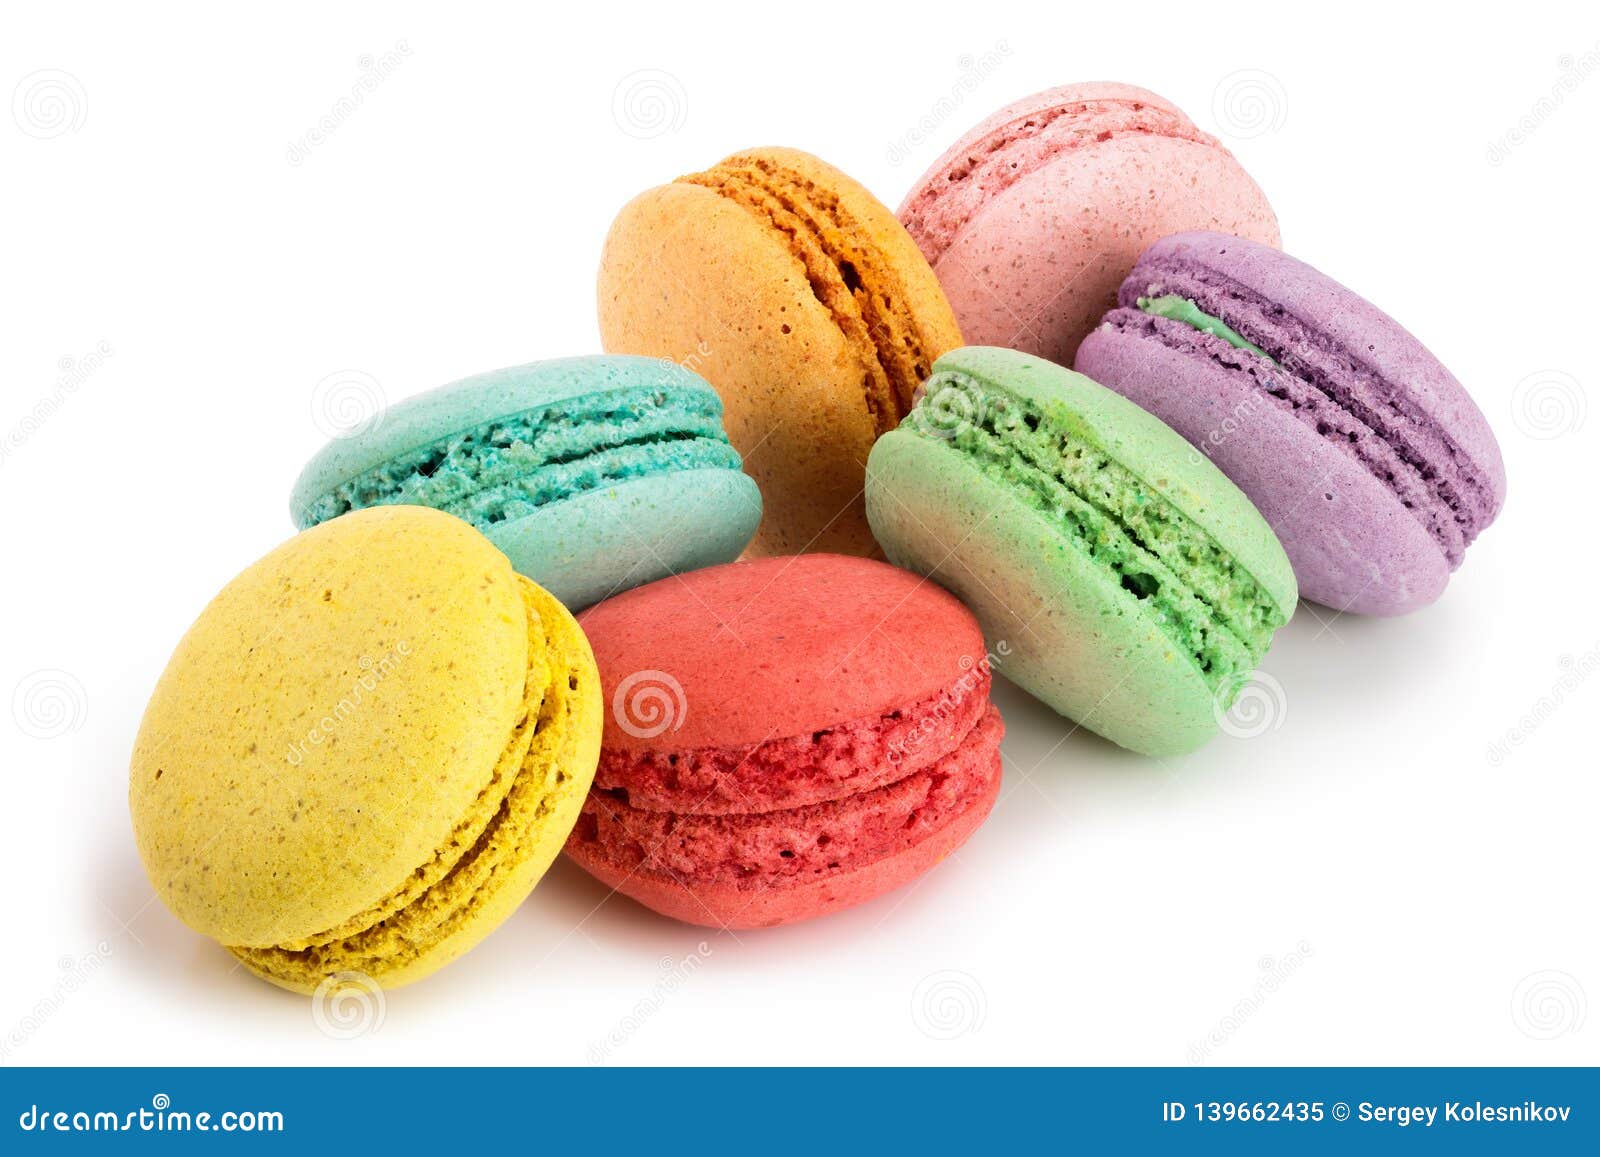 Colorful Macaroons Isolated on White Background Closeup Stock Image ...